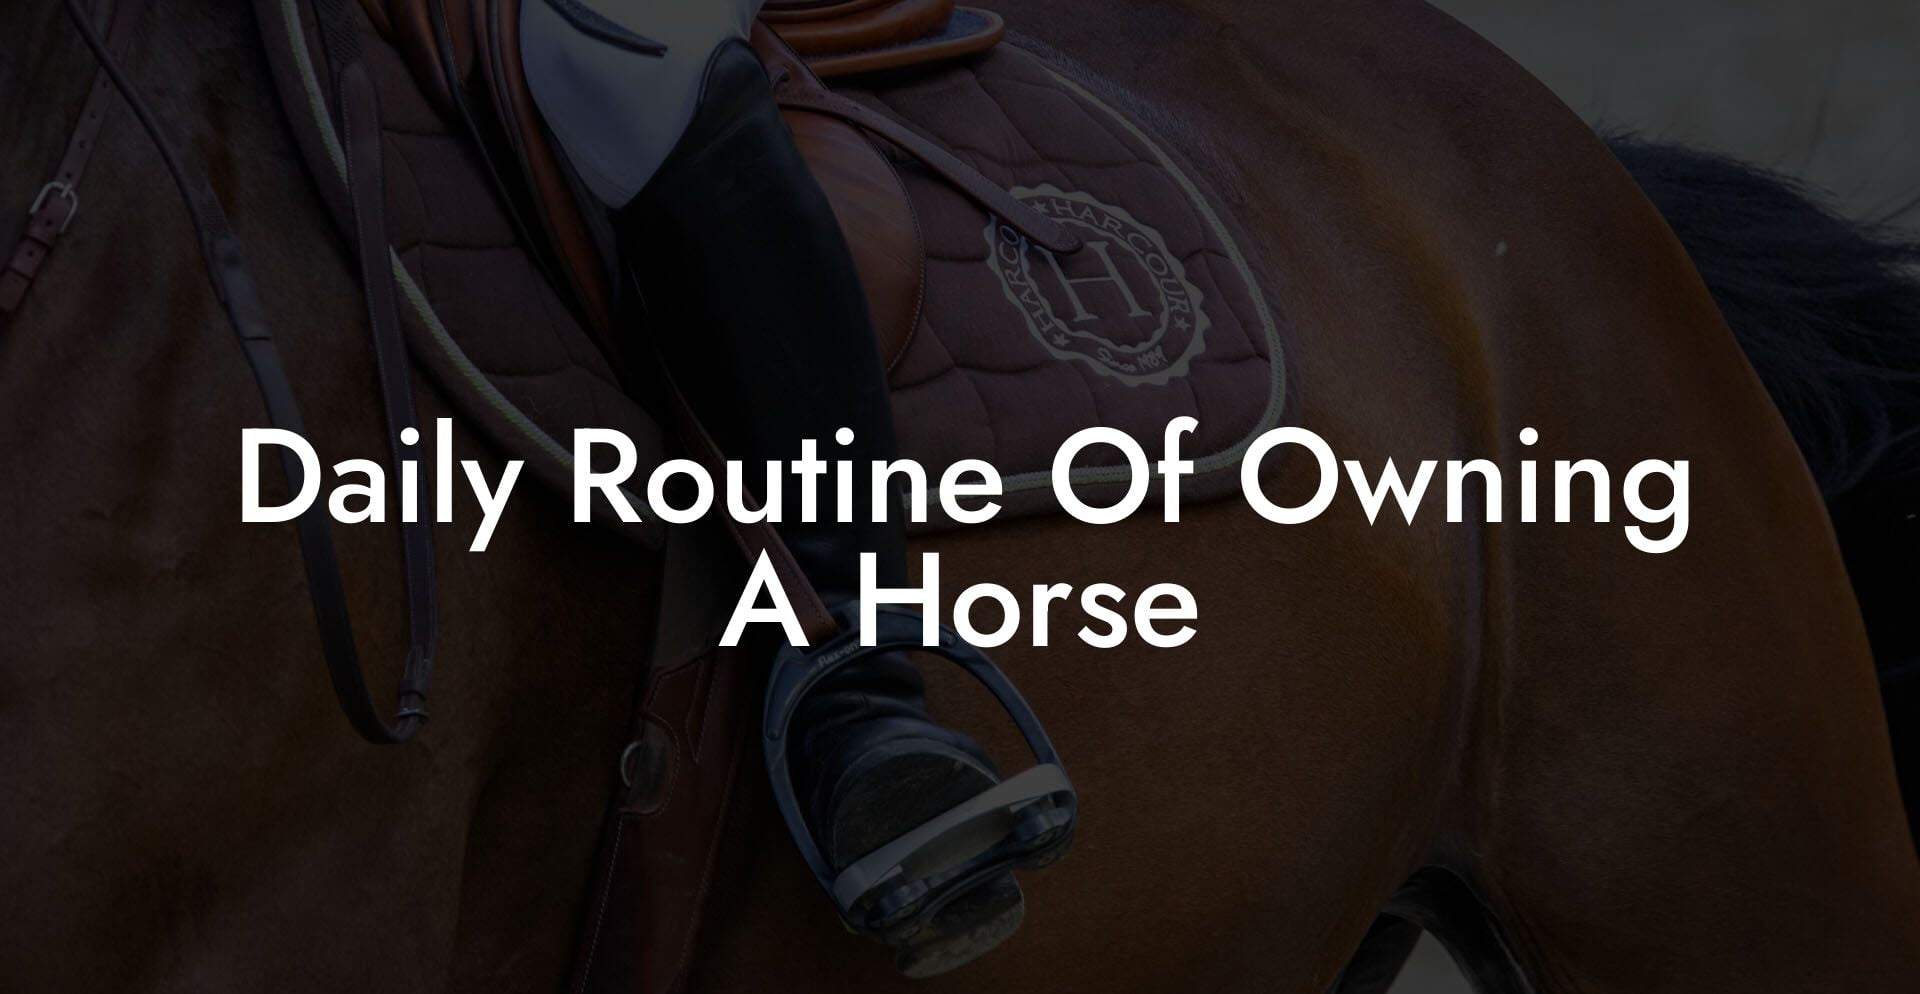 Daily Routine Of Owning A Horse